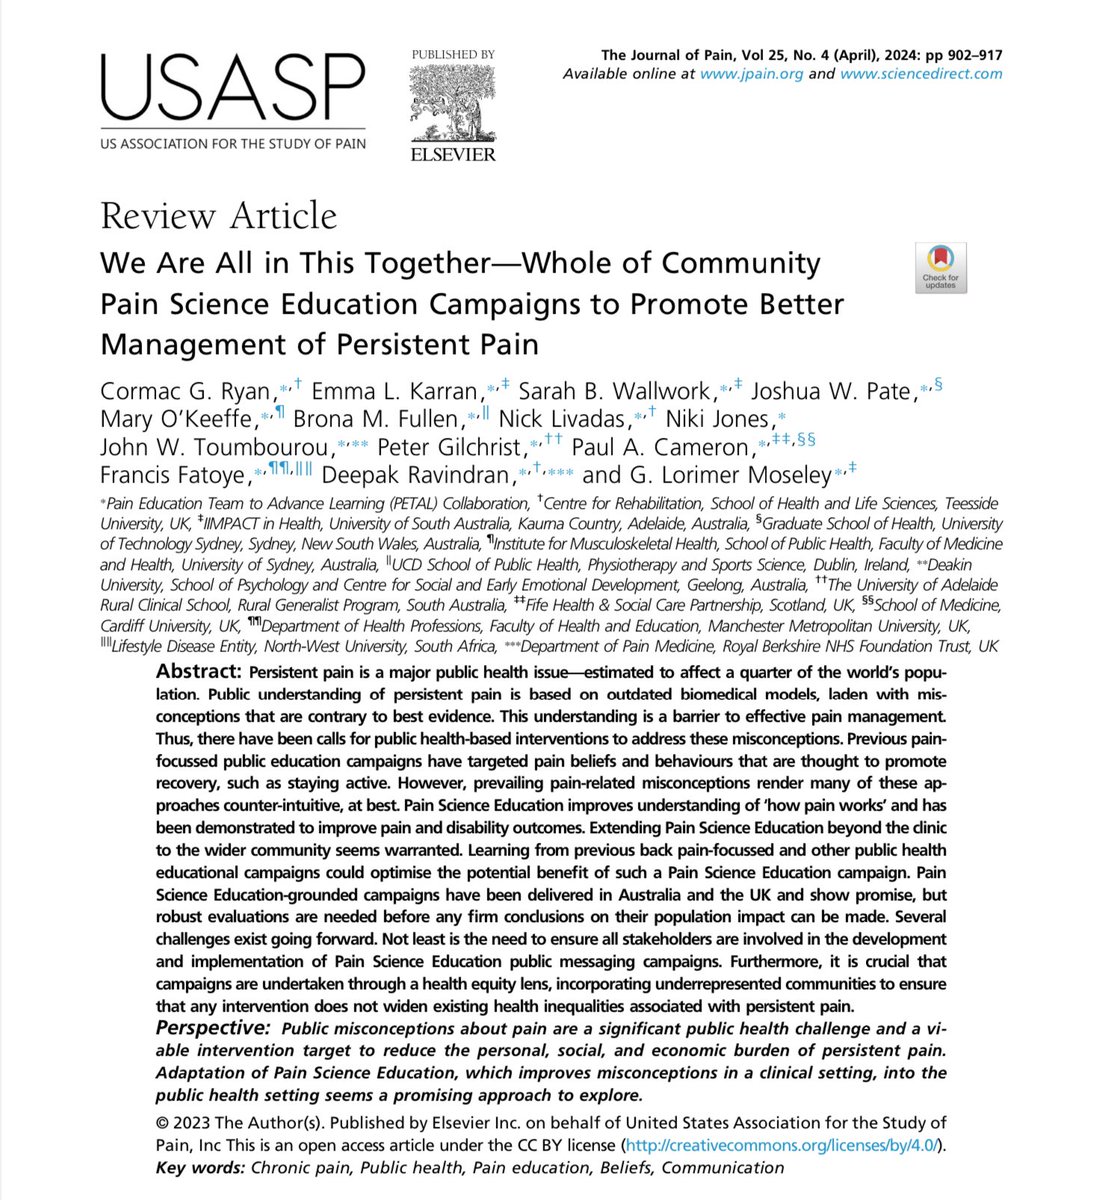 We Are All in This Together—Whole of Community Pain Science Education Campaigns to Promote Better Management of Persistent Pain pdf.sciencedirectassets.com/272520/1-s2.0-…